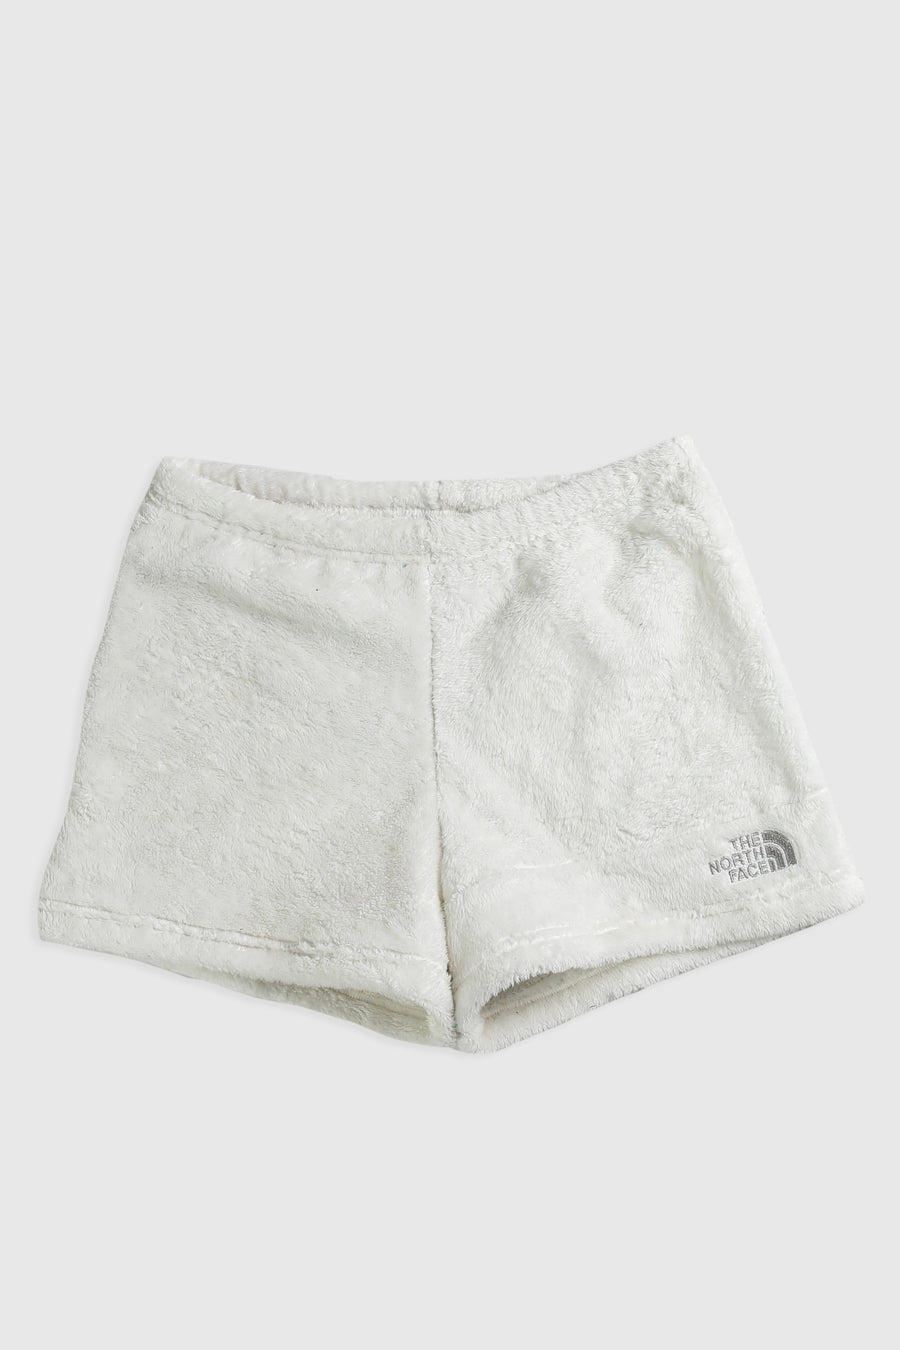 Rework North Face Fuzzy Shorts - XS, S